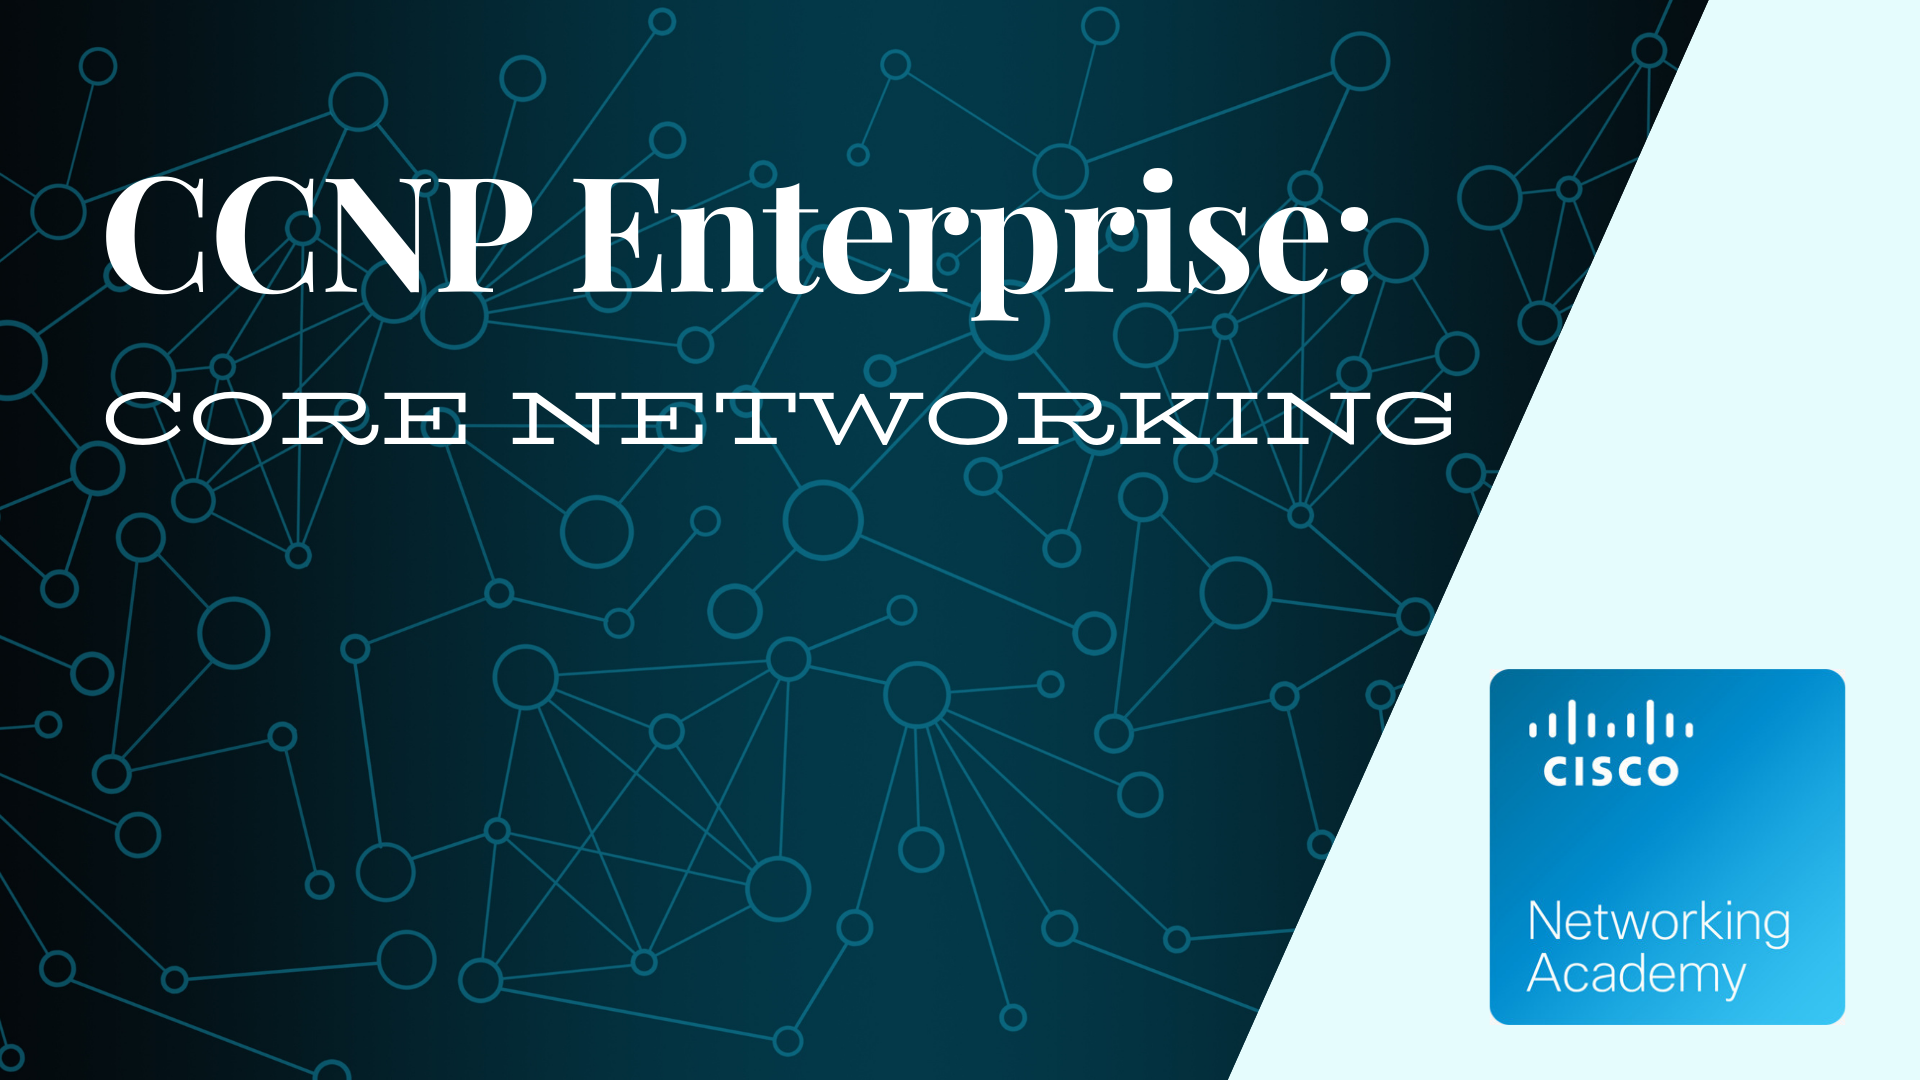 CCNP Enterprise: Core Networking & Advanced Routing CCNPCoreNetworking